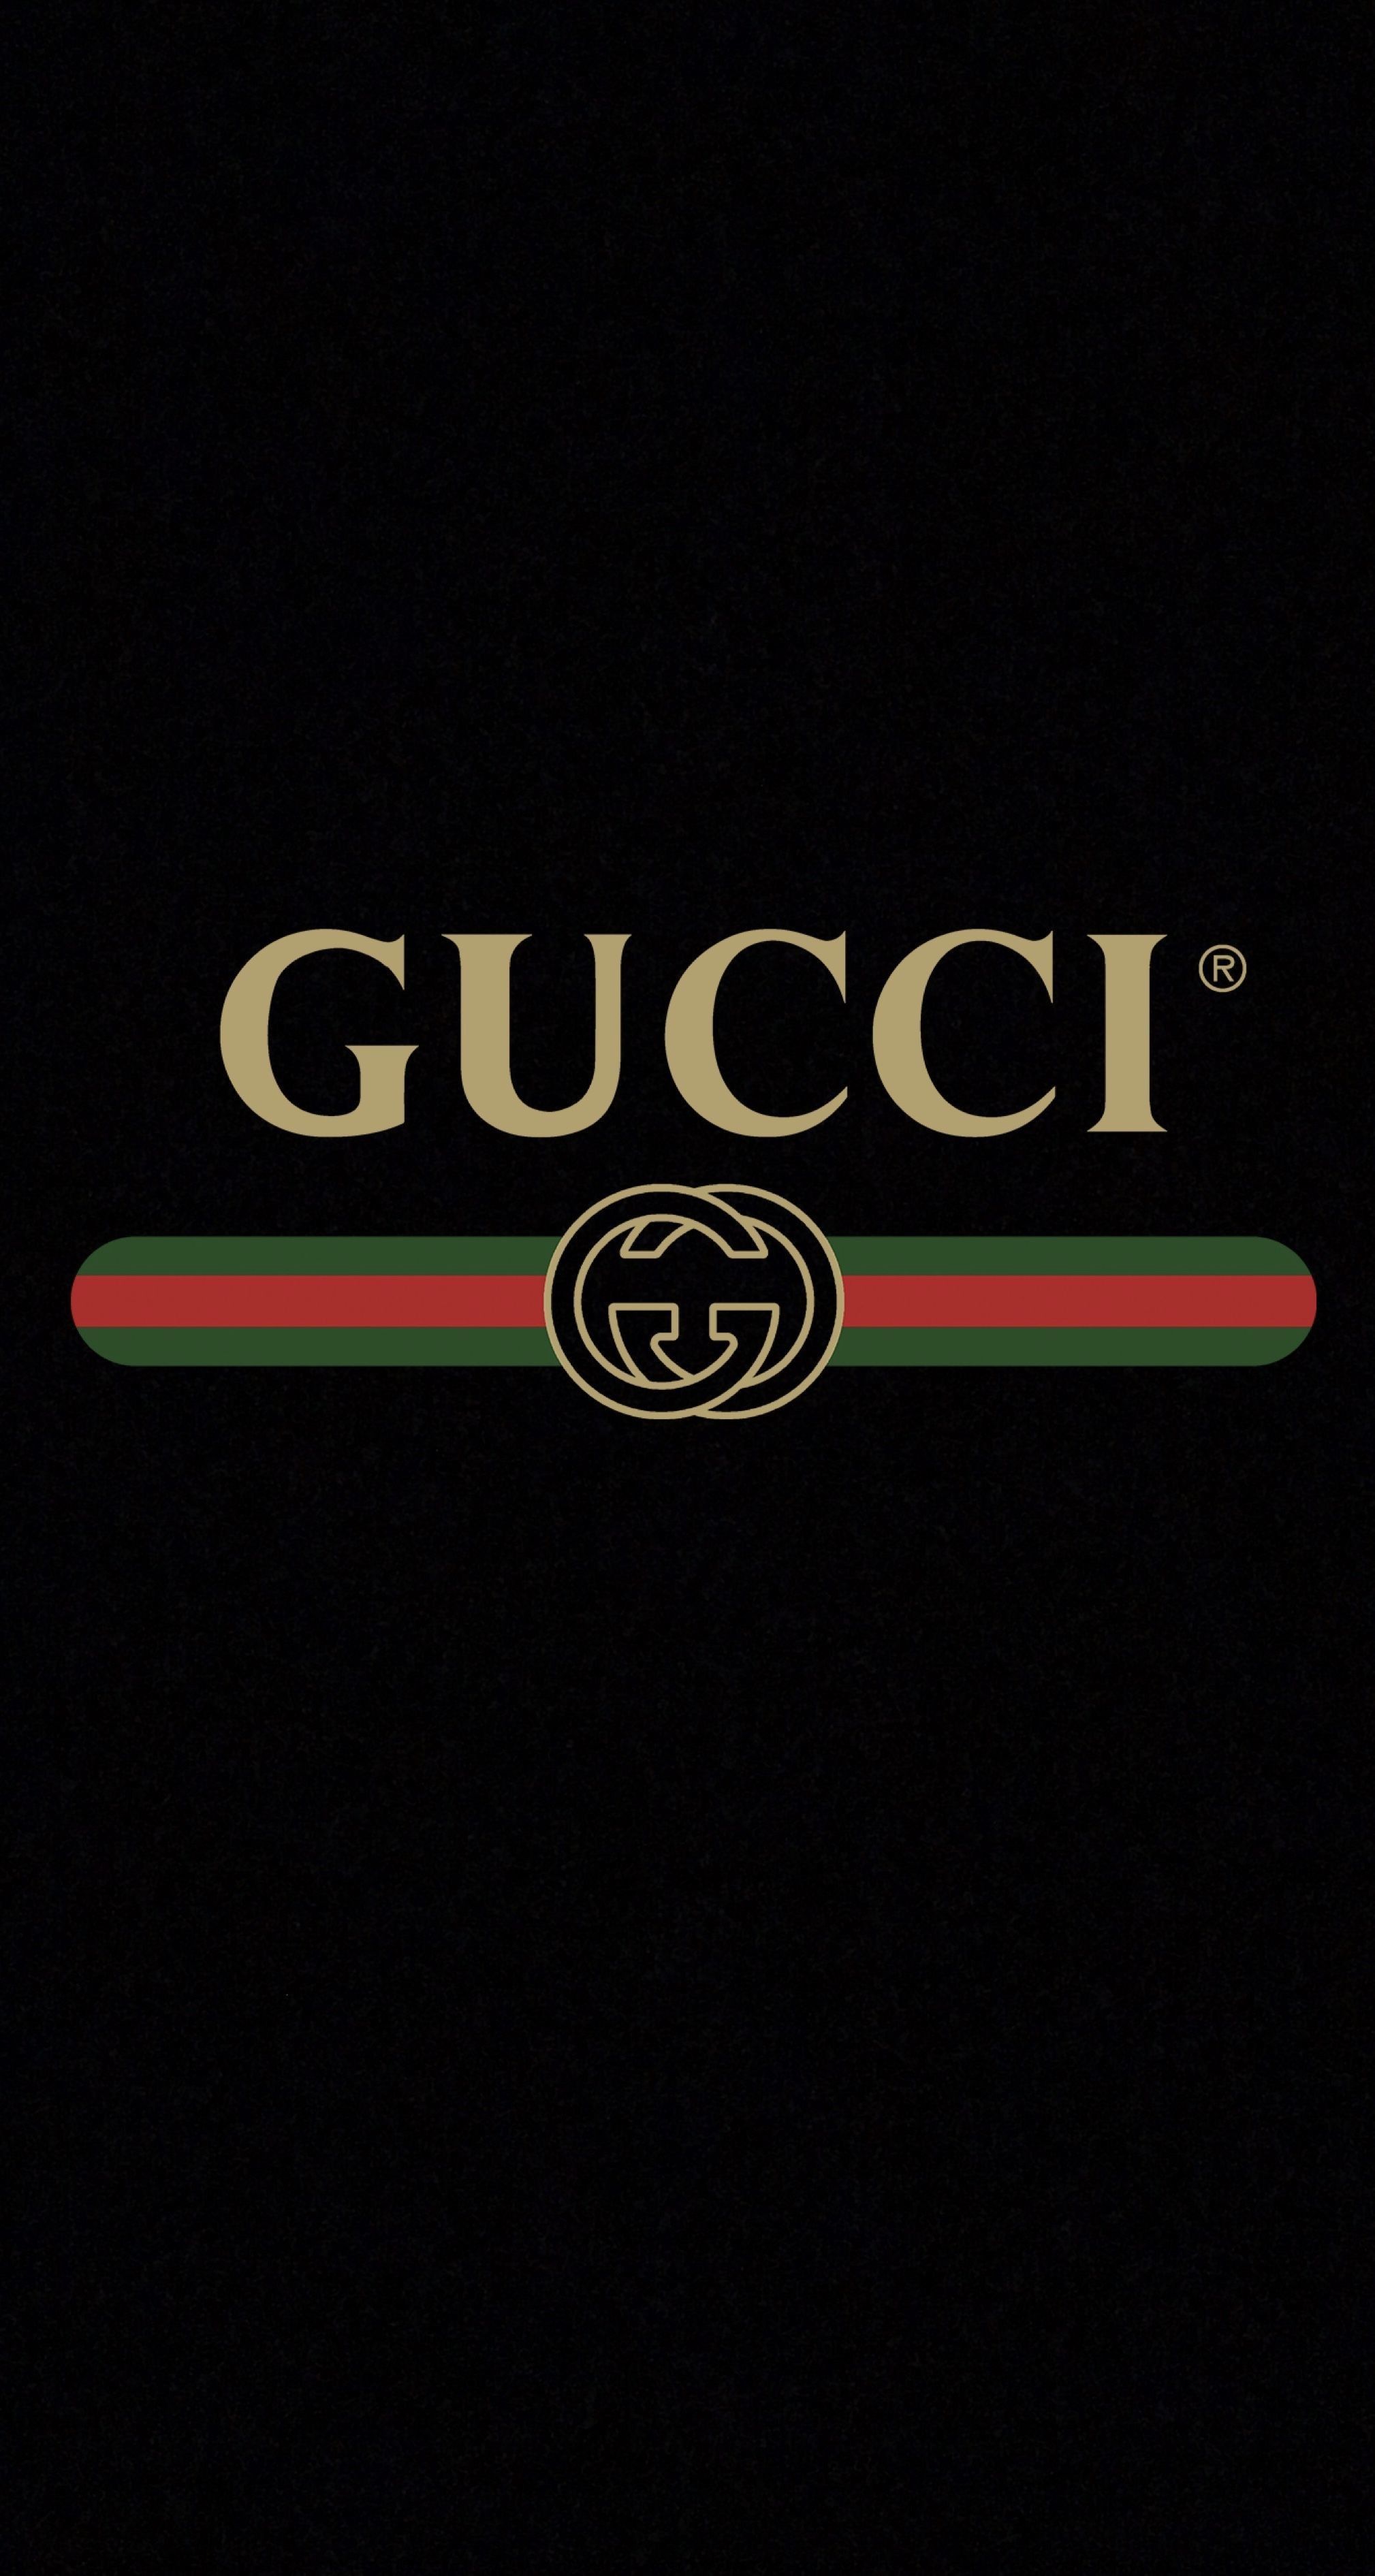 Cool Gucci Wallpaper Free Cool Gucci Background